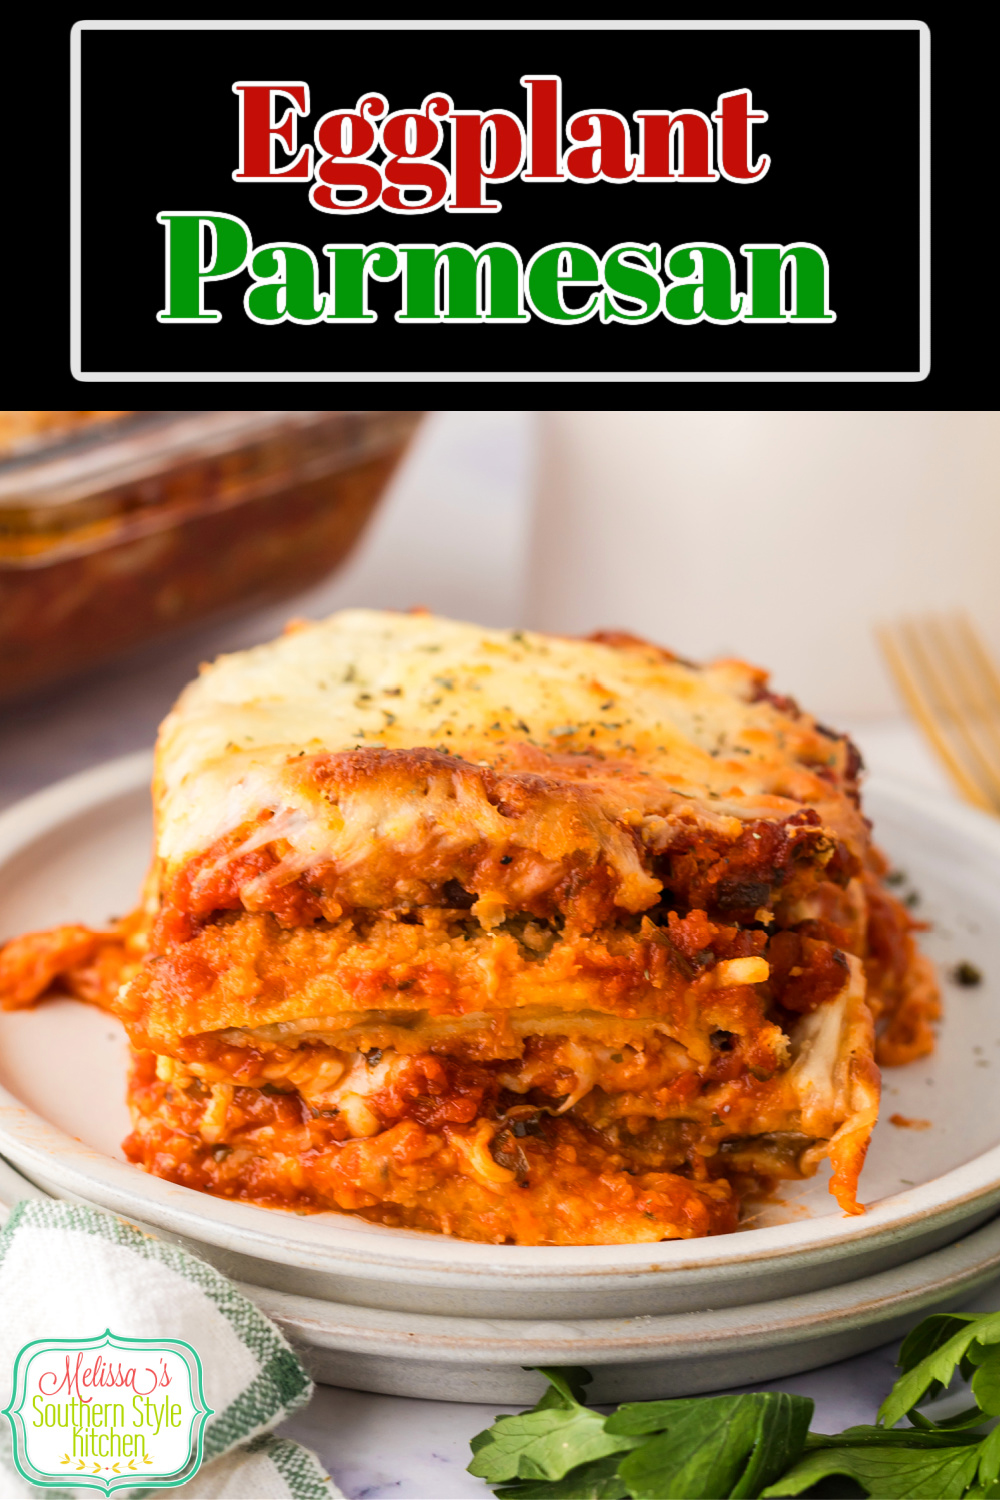 This recipe for Eggplant Parmesan is flavor packed. Serve it with a crisp green salad and garlic bread for a restaurant quality meal at home. #eggplantrecipes #eggplantparmesan #eggplant #Italianeggplantparmesan #easycasseroles #vegetarianrecipes via @melissasssk